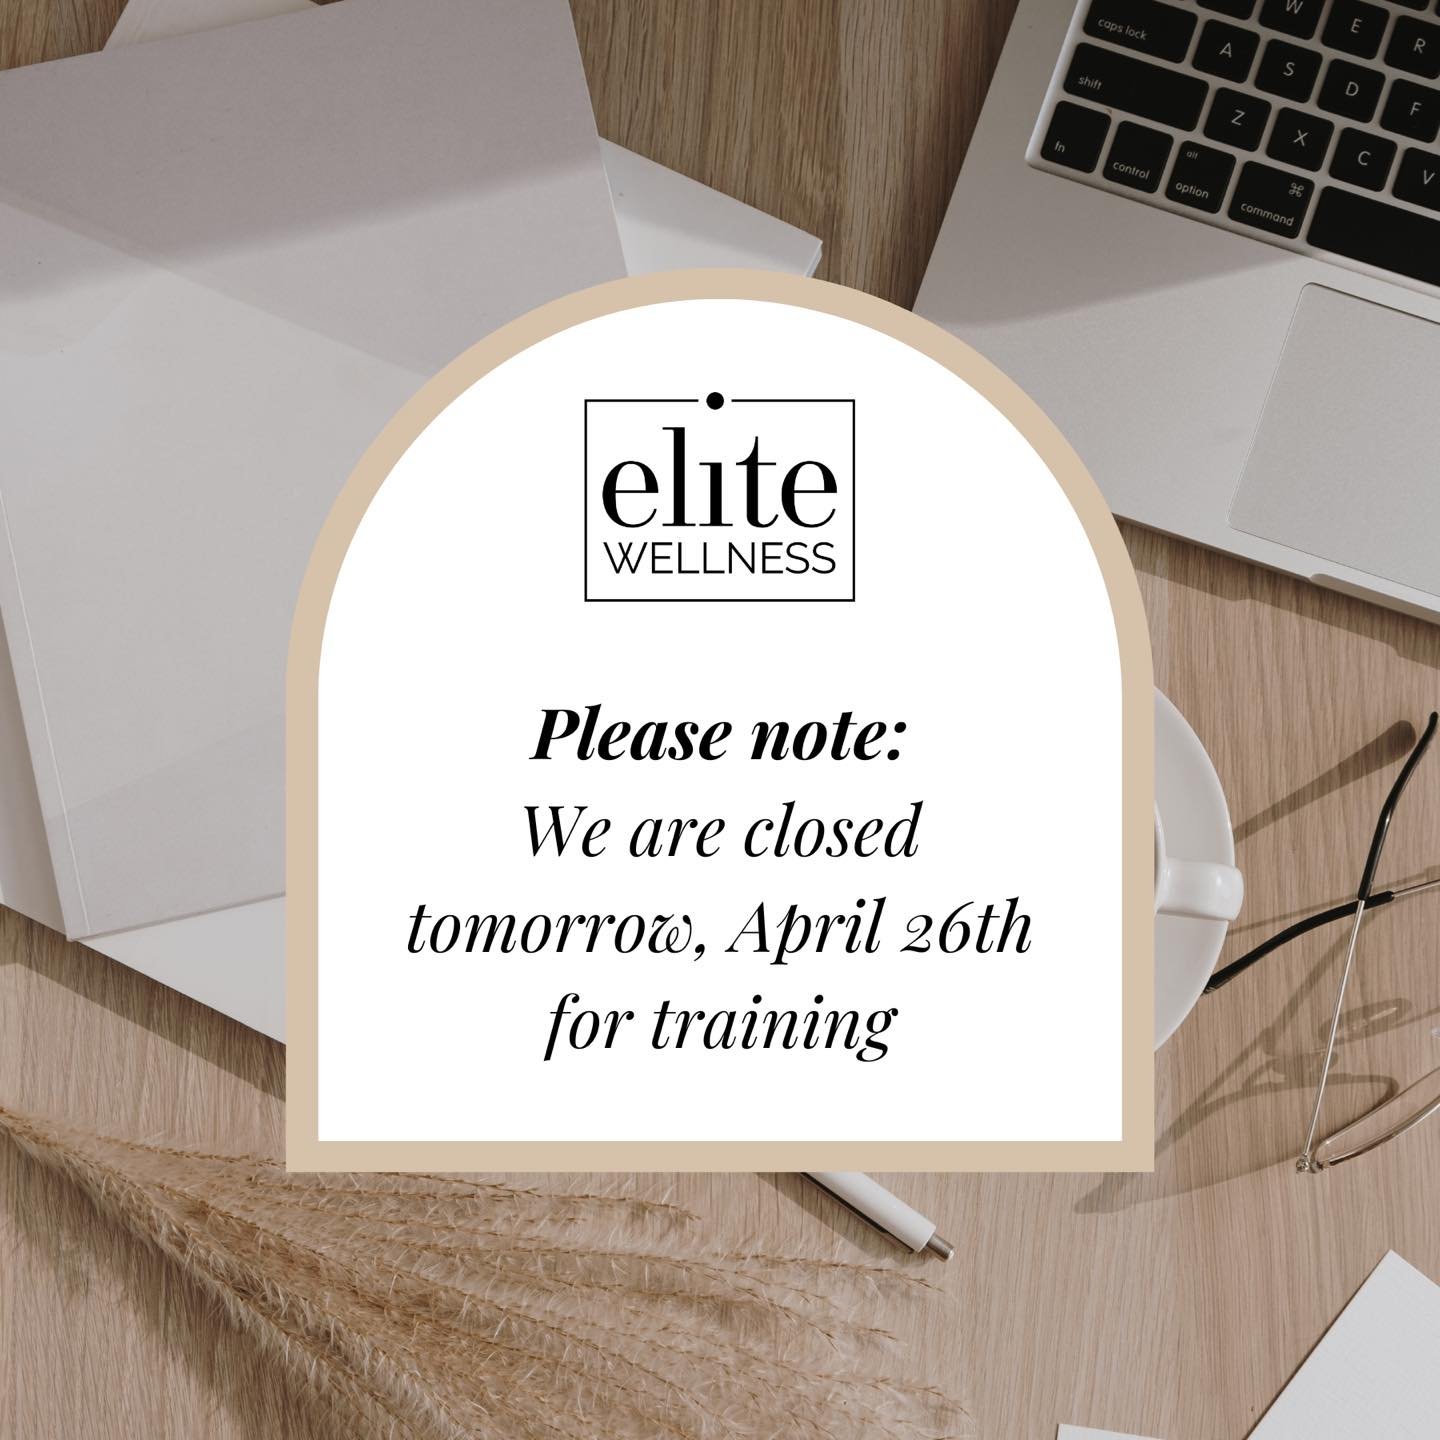 We will be closed tomorrow for some leadership training to maintain our top notch service to our patients. Come see us today or we will see you next week. 🫶🏼